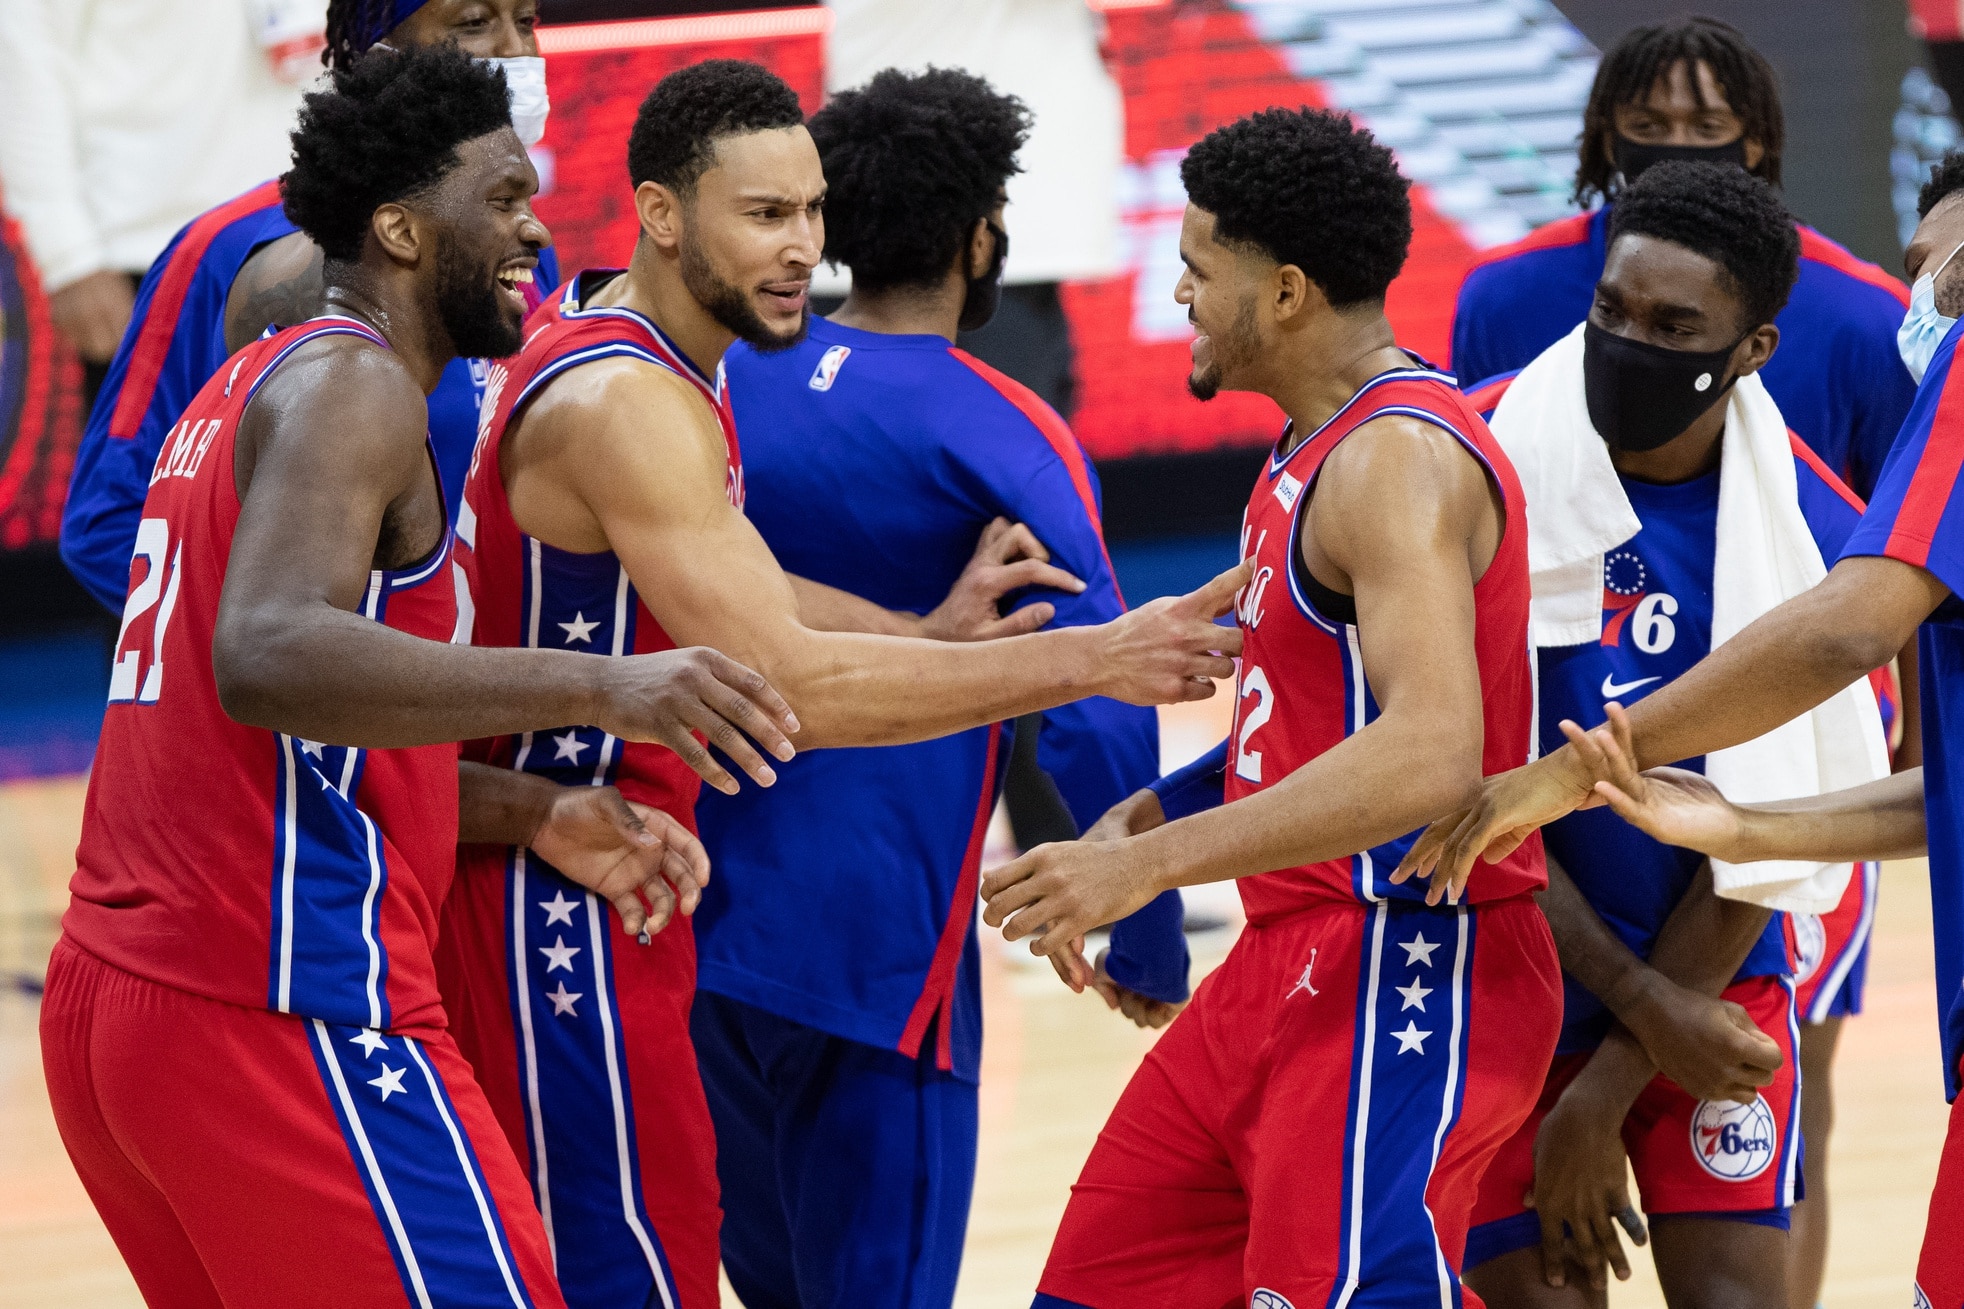 Sixers vs. Hornets Betting Preview (February 3, 2021)